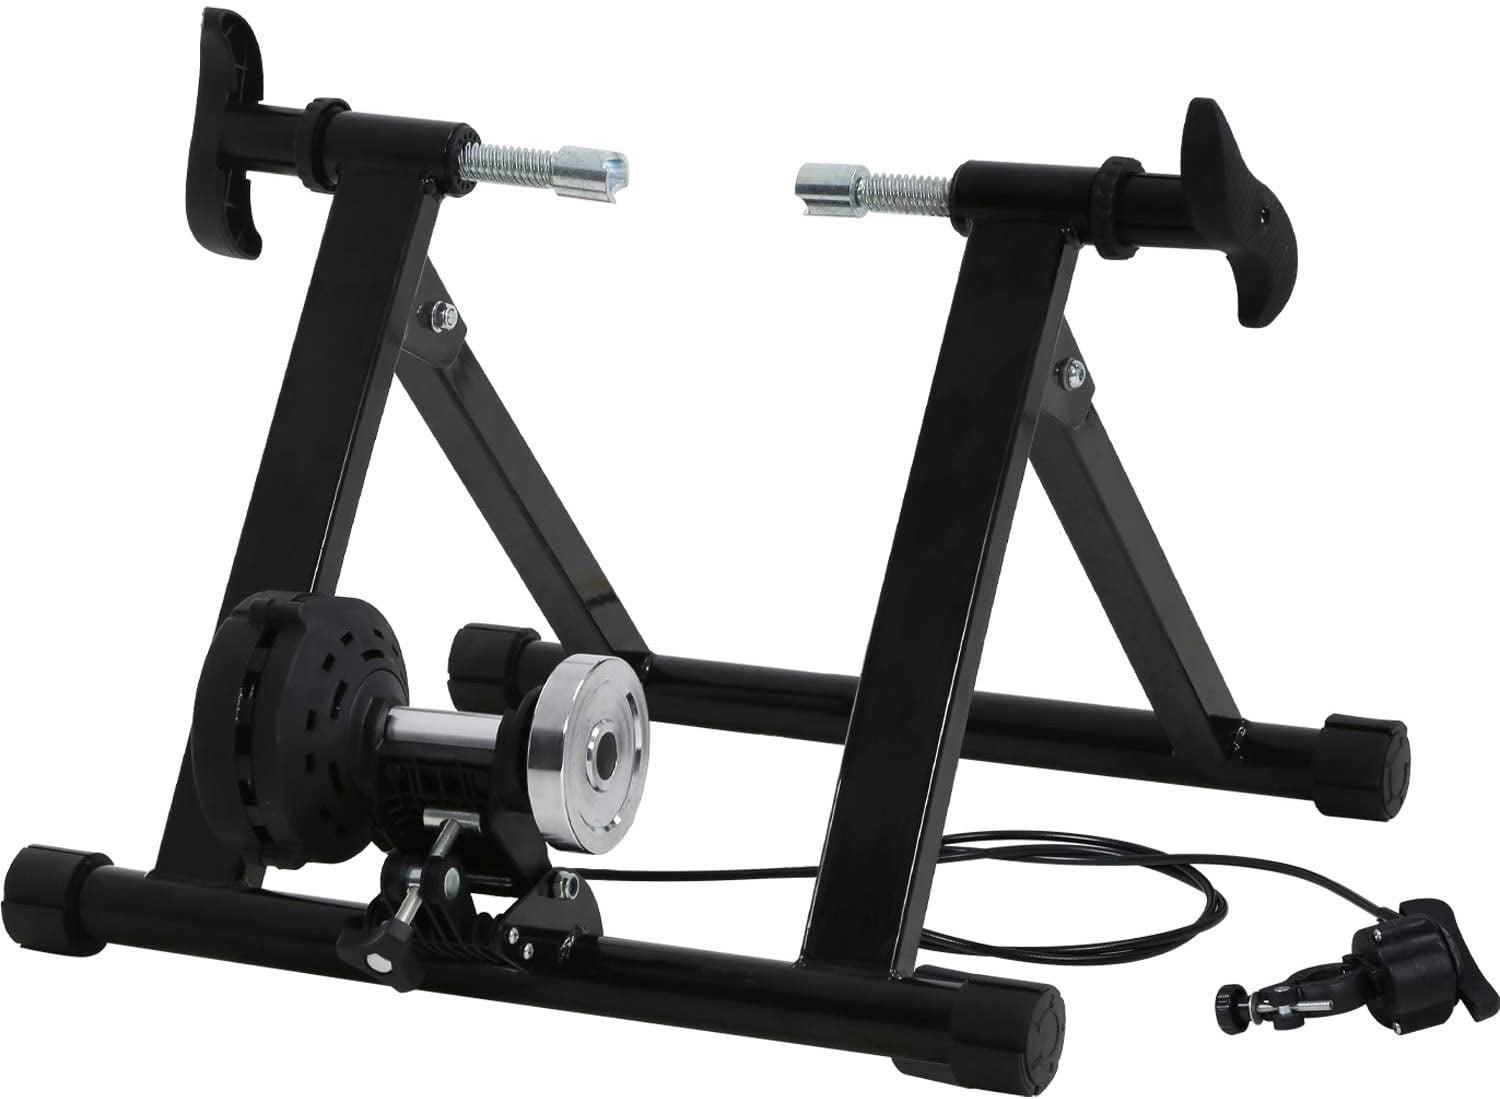 Soozier 5661-0017BL Magnetic Indoor Bike Bicycle Trainer Stand Exercise Fitness 5 Level Resistance-Black 